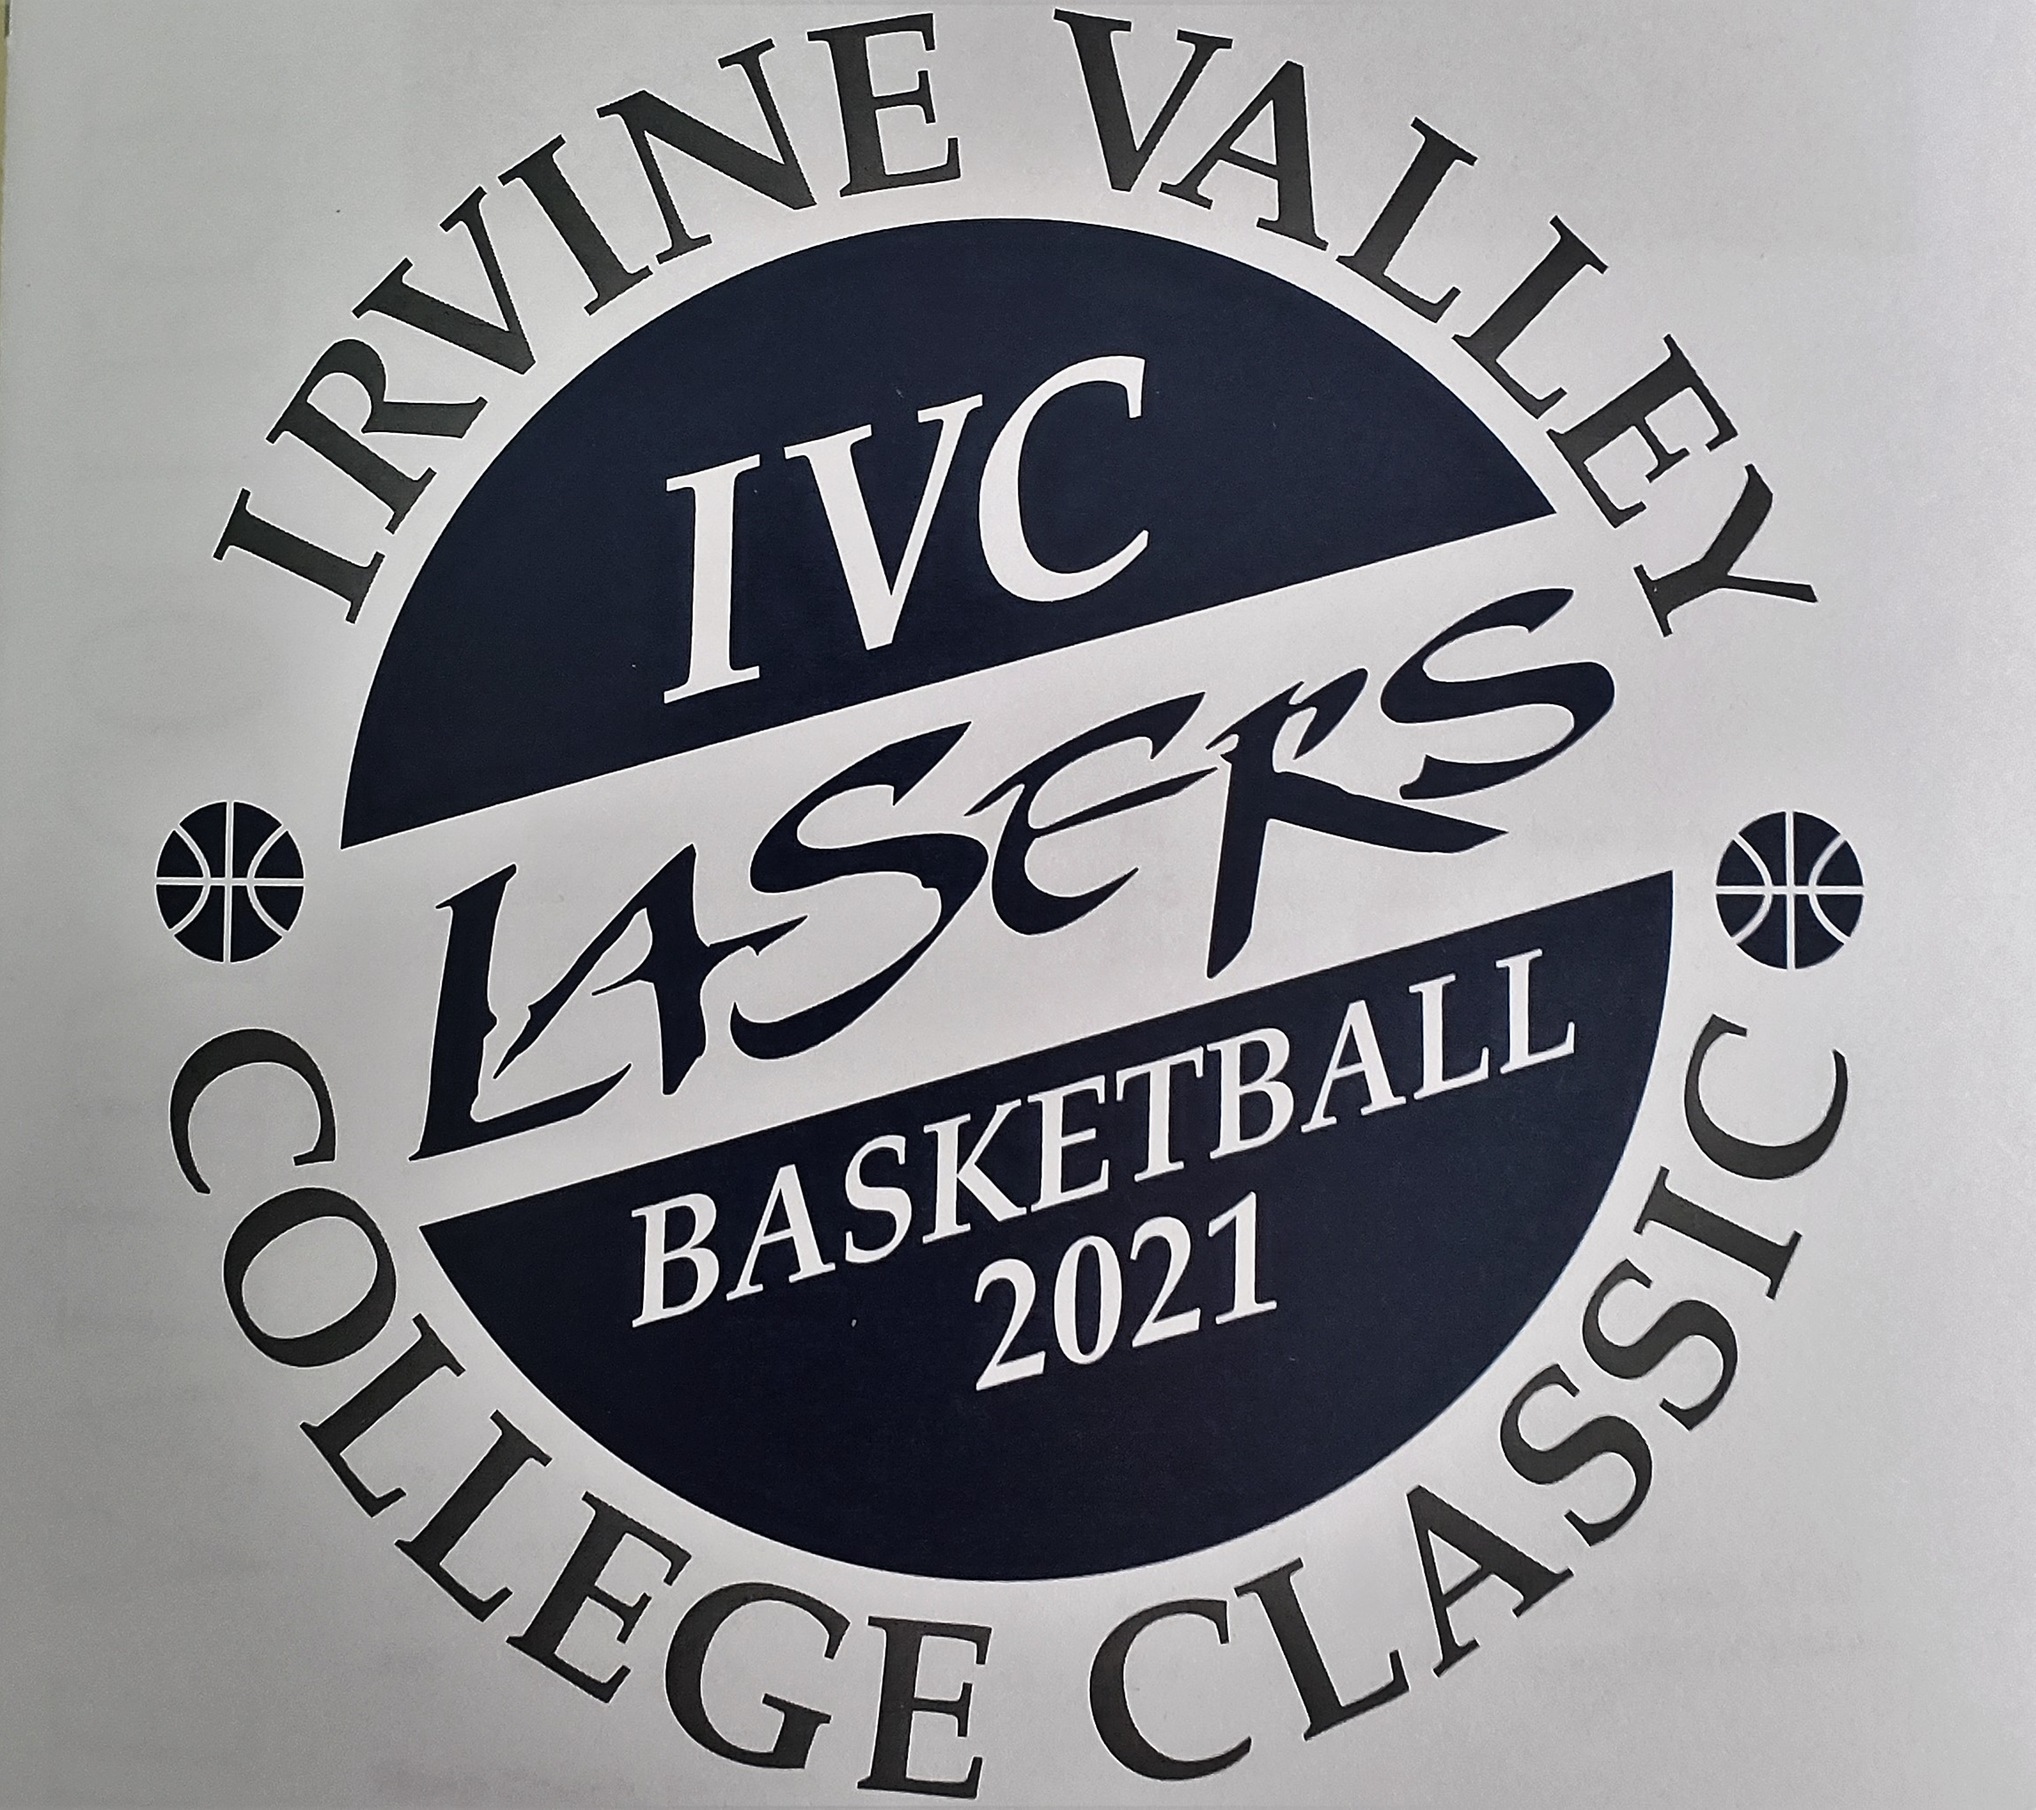 25th Annual Irvine Valley Basketball Classic starts Thursday